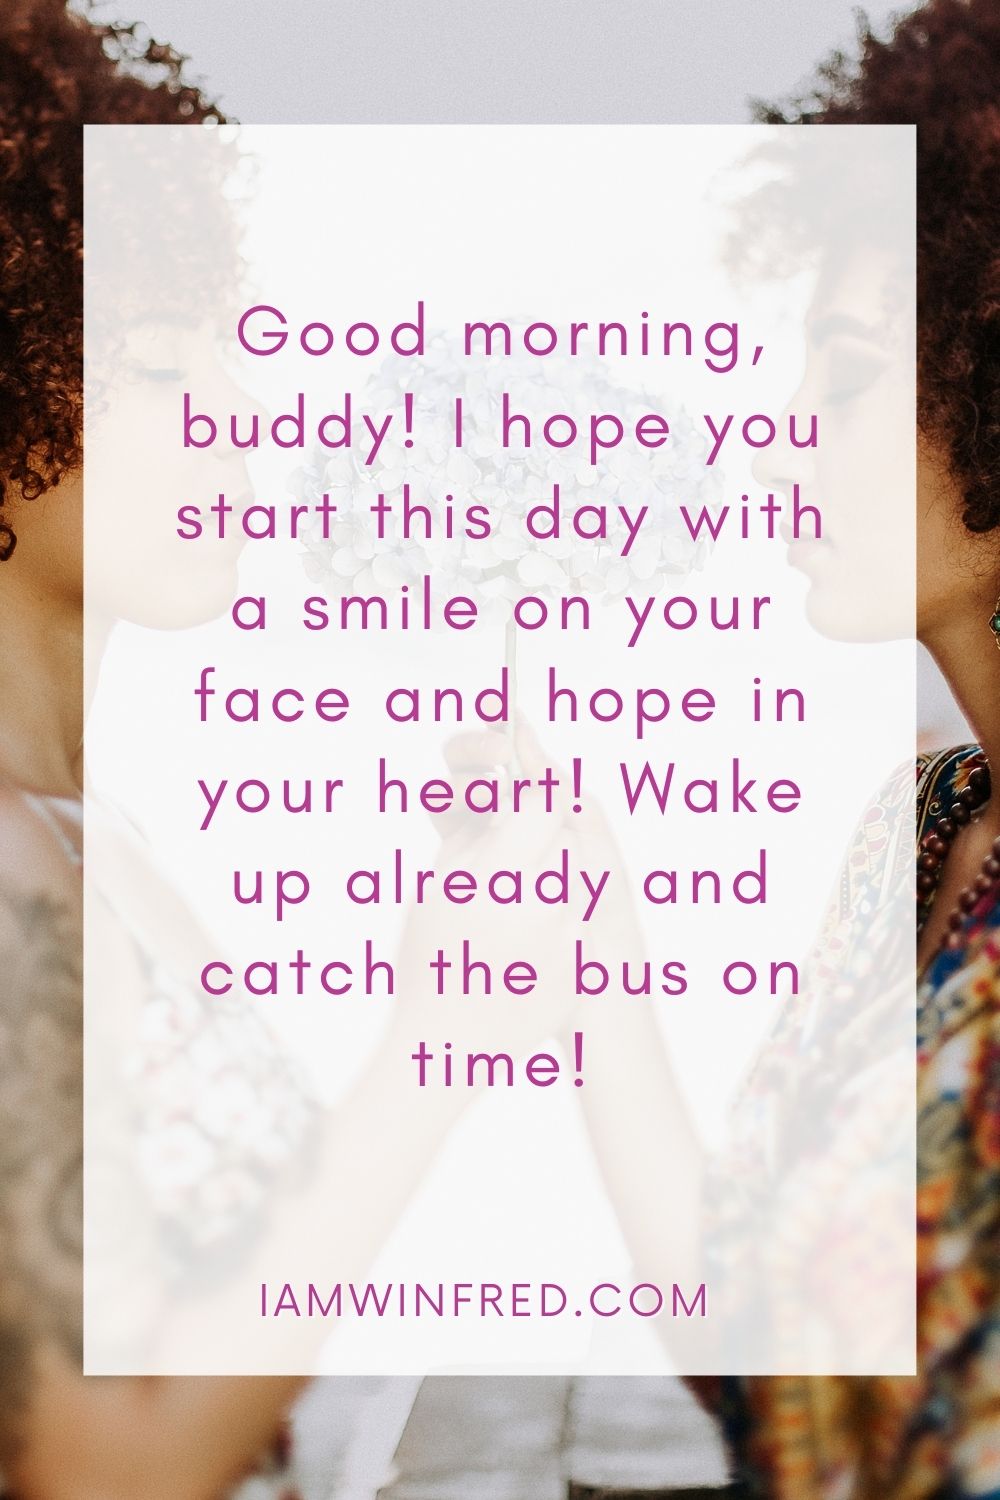 Good Morning Buddy I Hope You Start This Day With A Smile On Your Face And Hope In Your Heart Wake Up Already And Catch The Bus On Time